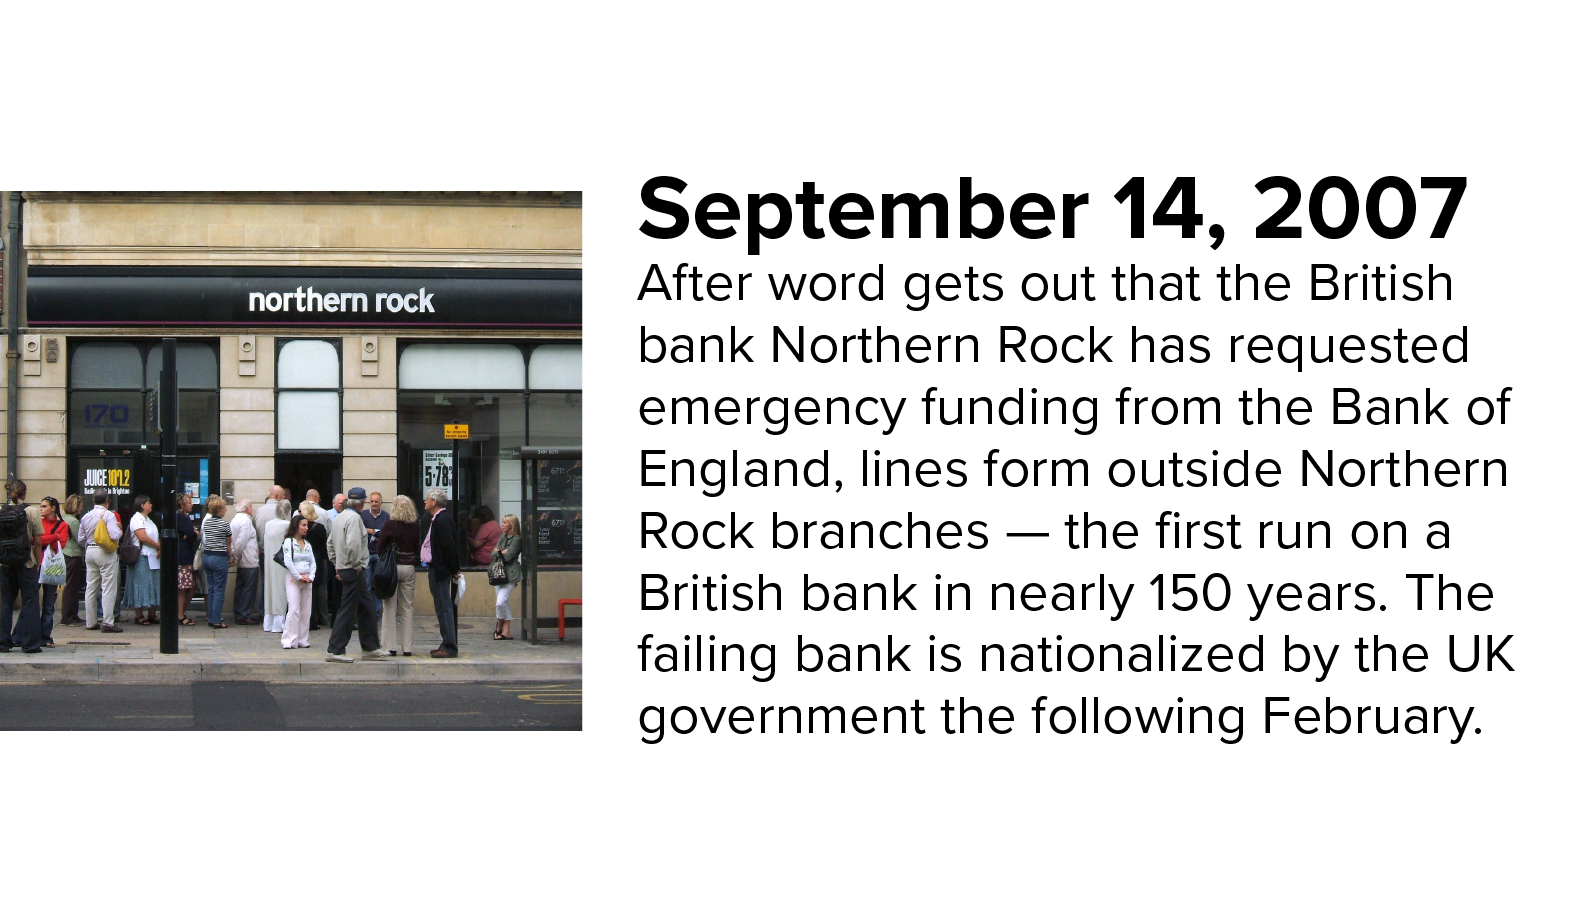 Run on the bank. Photo shows a line of customers waiting to withdraw their money outside of Northern Rock bank in the UK.